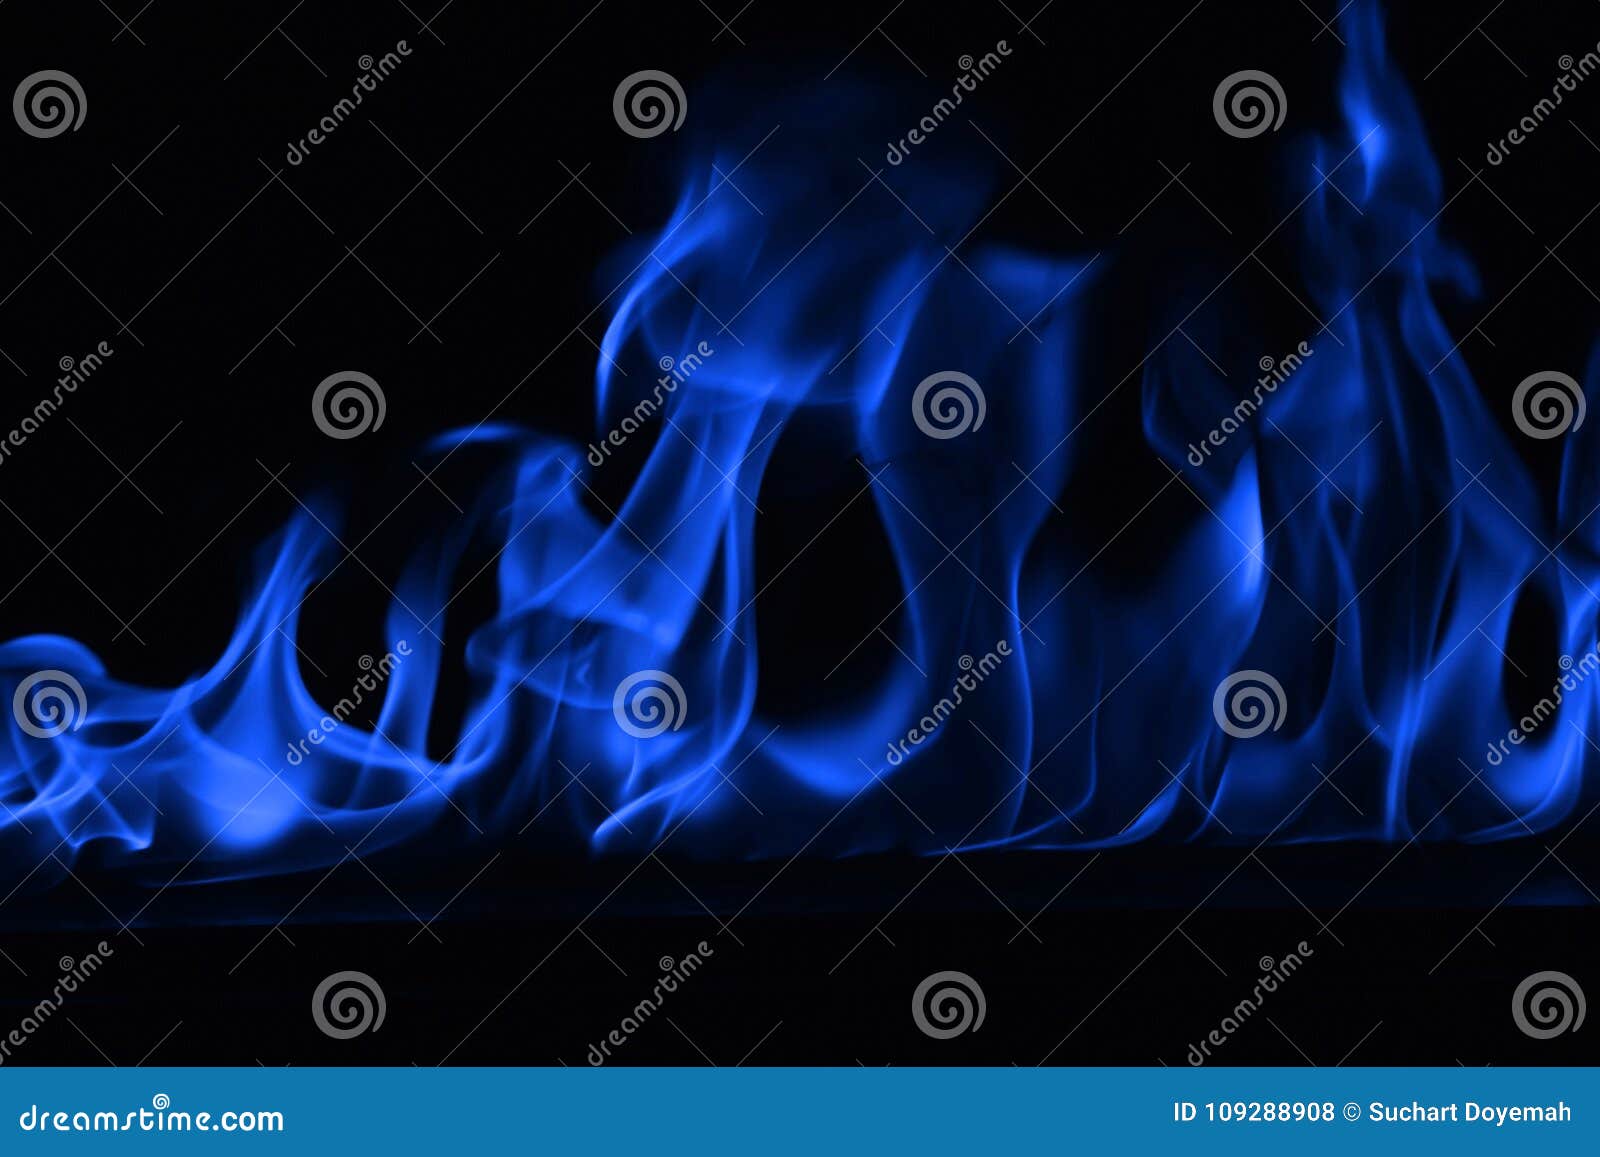 blue flames of fire as abstract backgorund